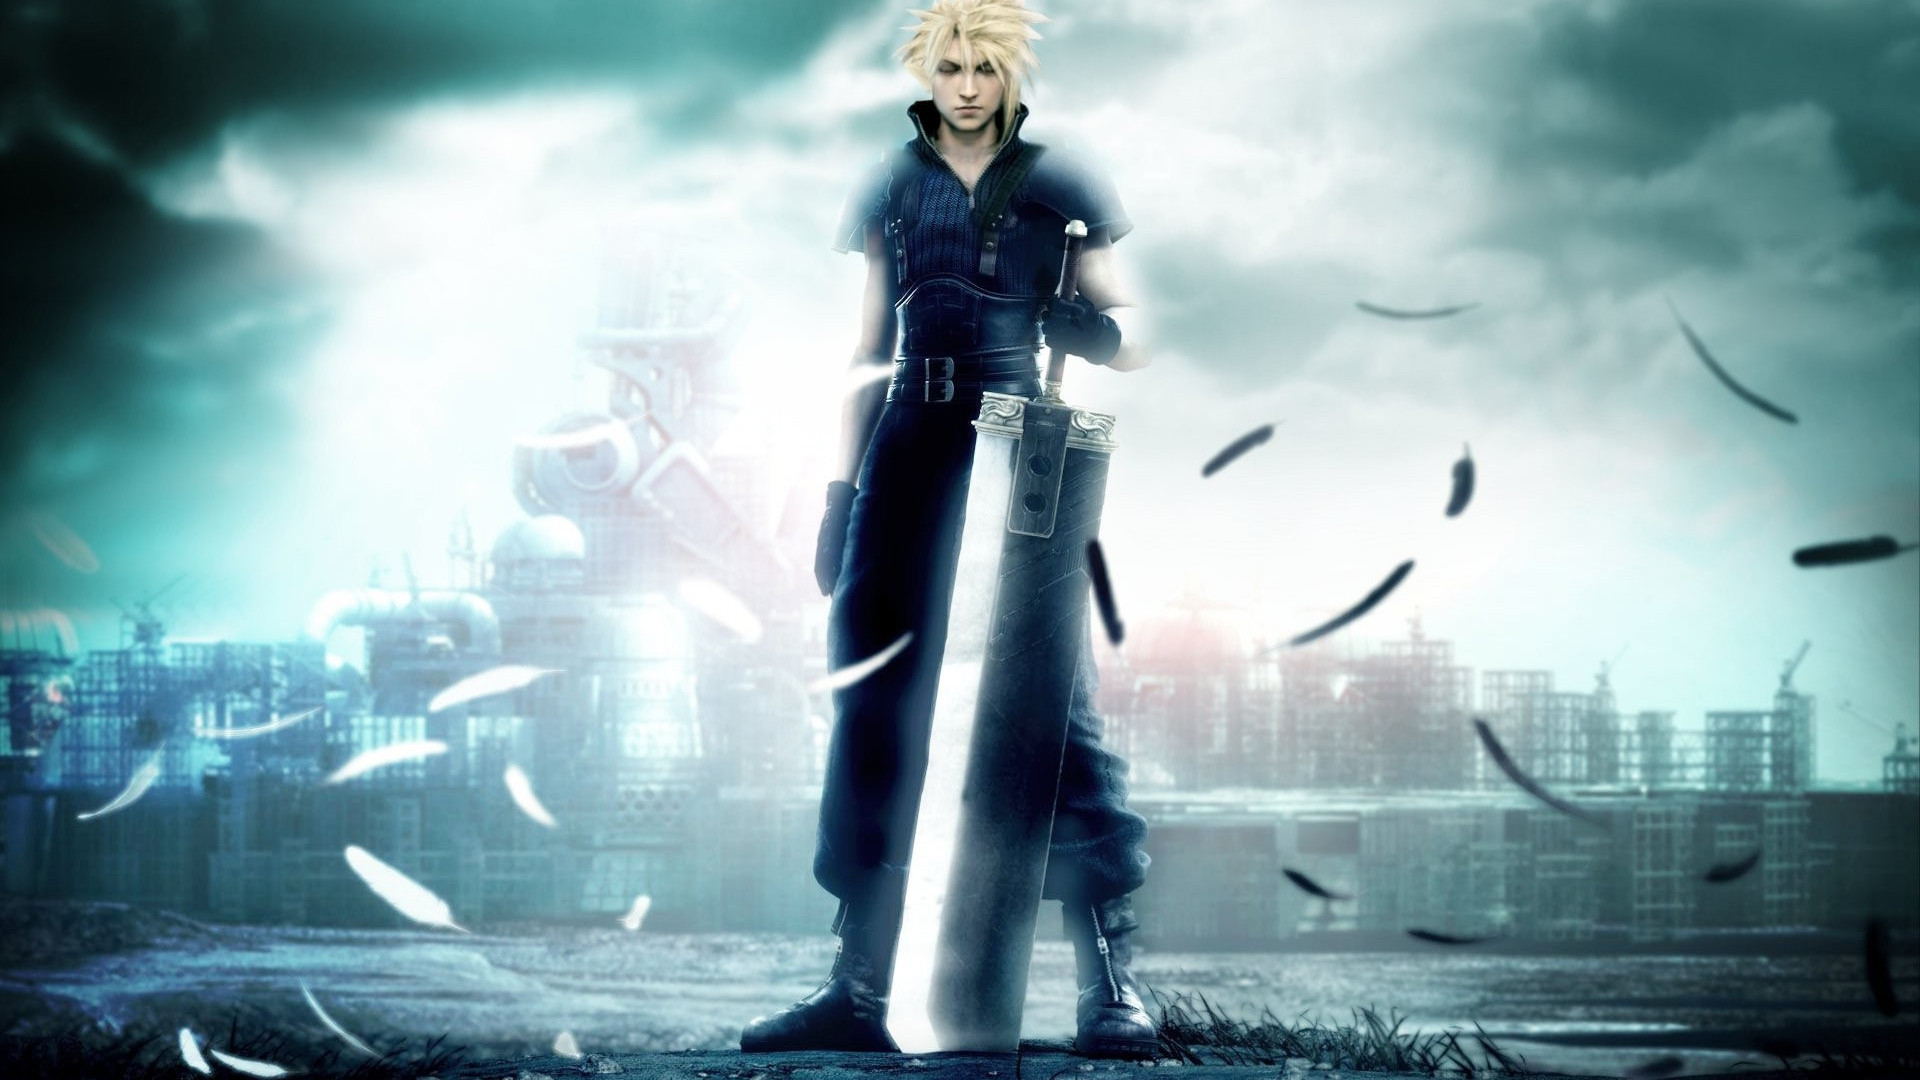 55 Final Fantasy VII Remake Wallpapers I made Contains spoilers   rFFVIIRemake